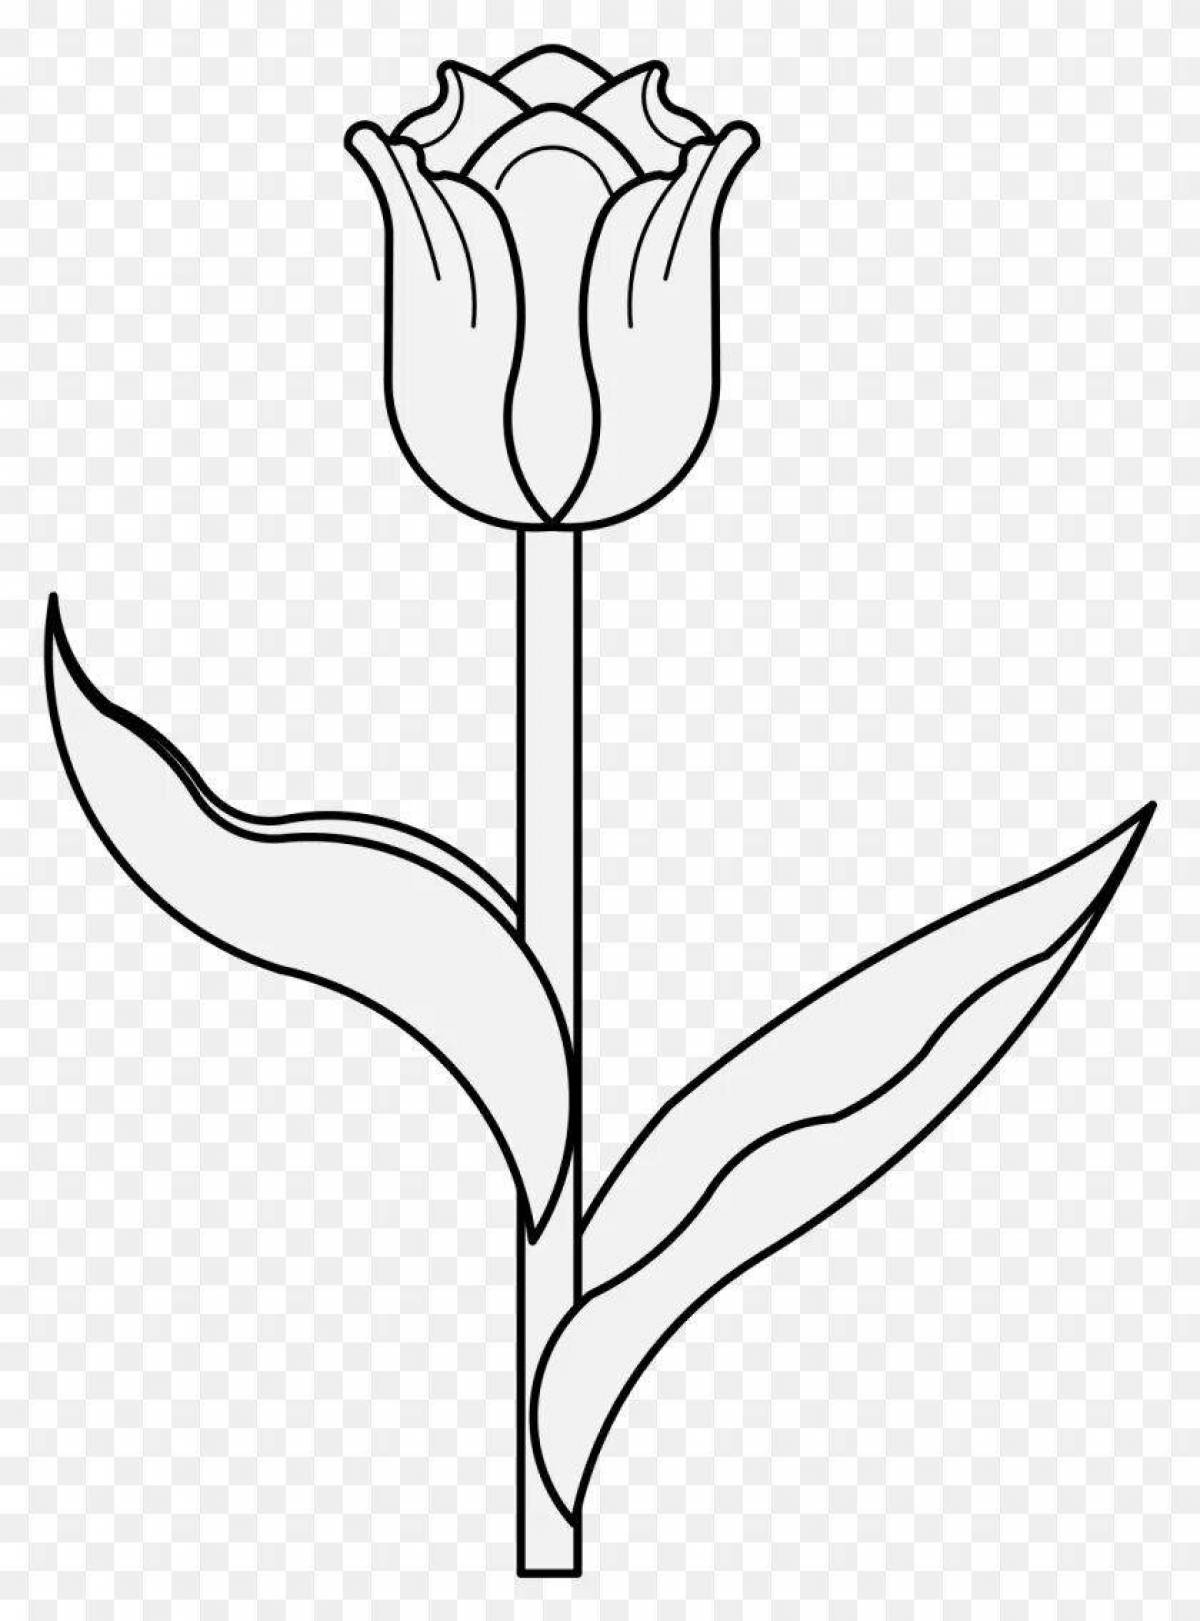 Coloring page cheerful tulip